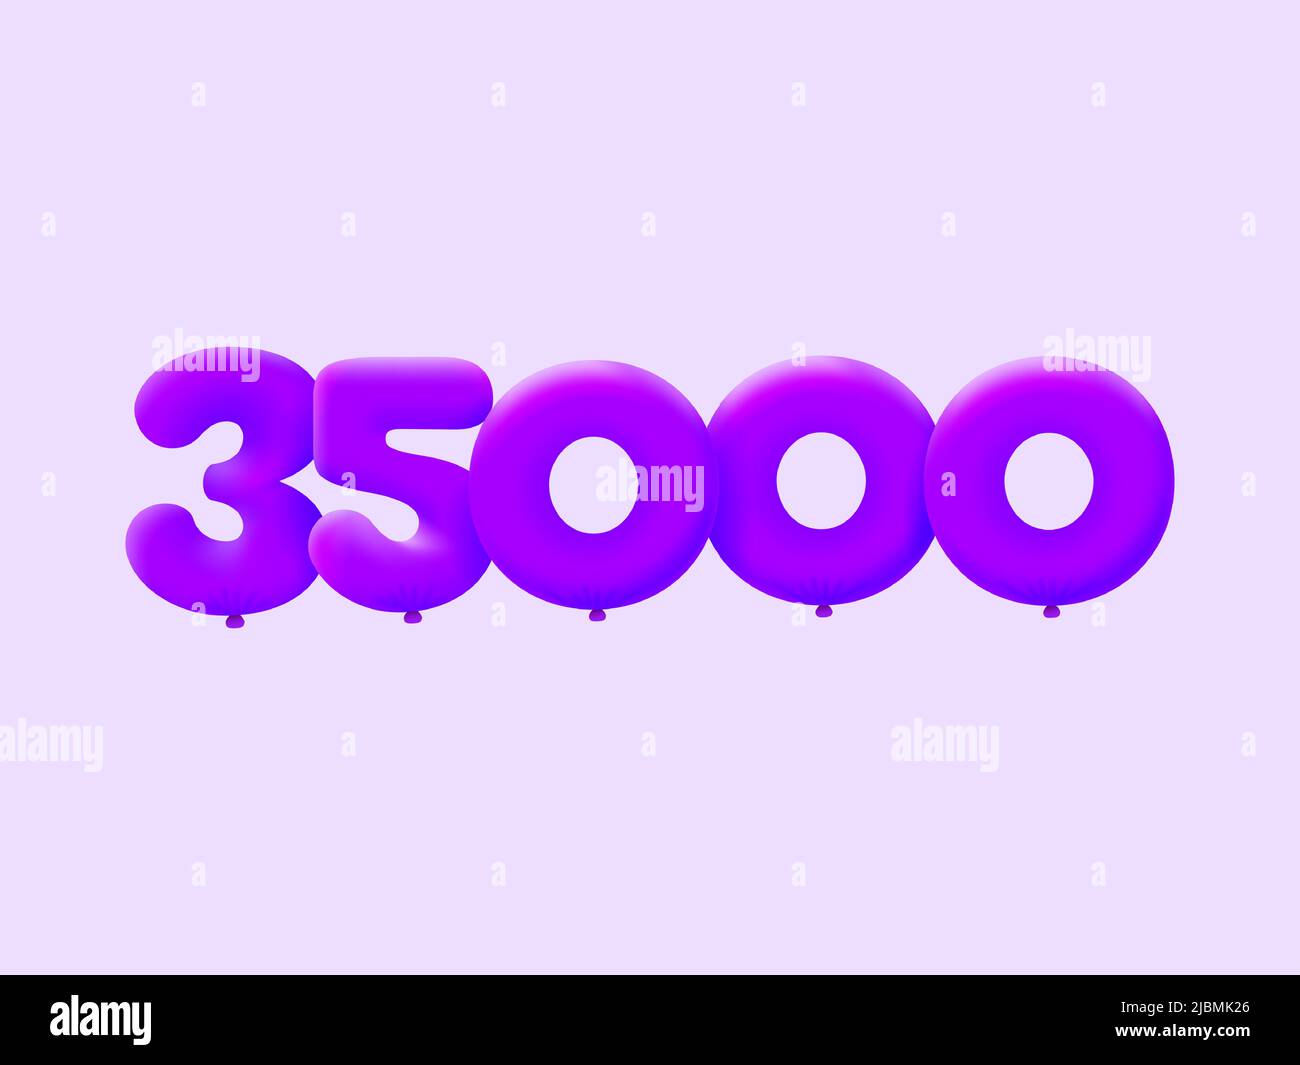 Purple 3D number 35000 balloon realistic 3d helium Purple balloons. Vector illustration design Party decoration,Birthday,Anniversary,Christmas,Xmas,New year,Holiday Sale,celebration,carnival Stock Vector